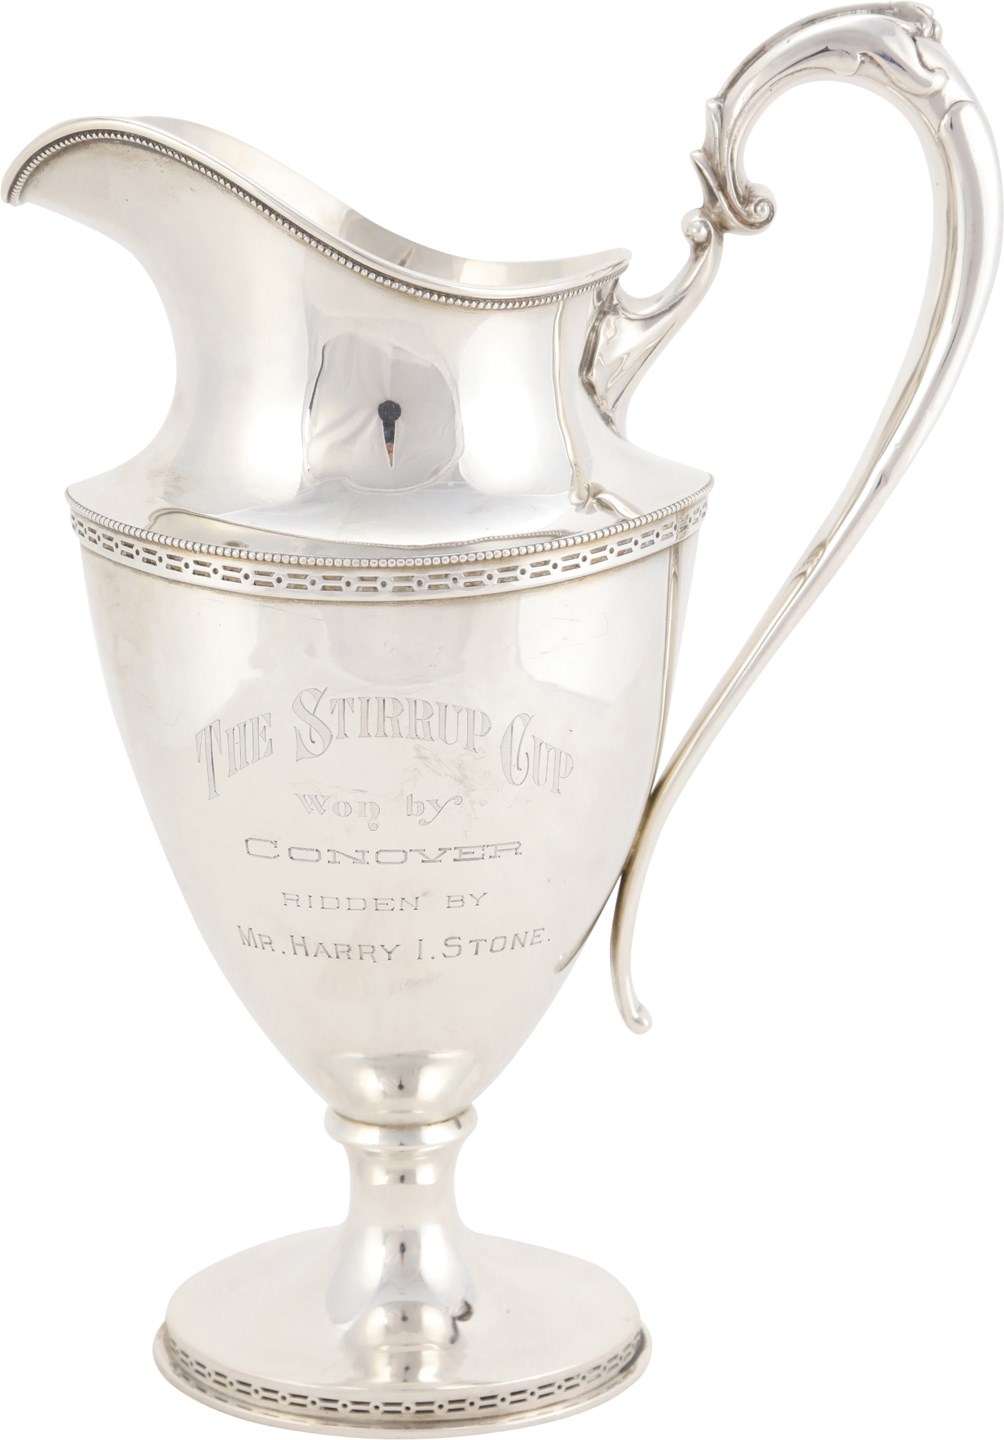 Historic 1904 Sterling Silver Trophy from the Coney Island Jockey Club